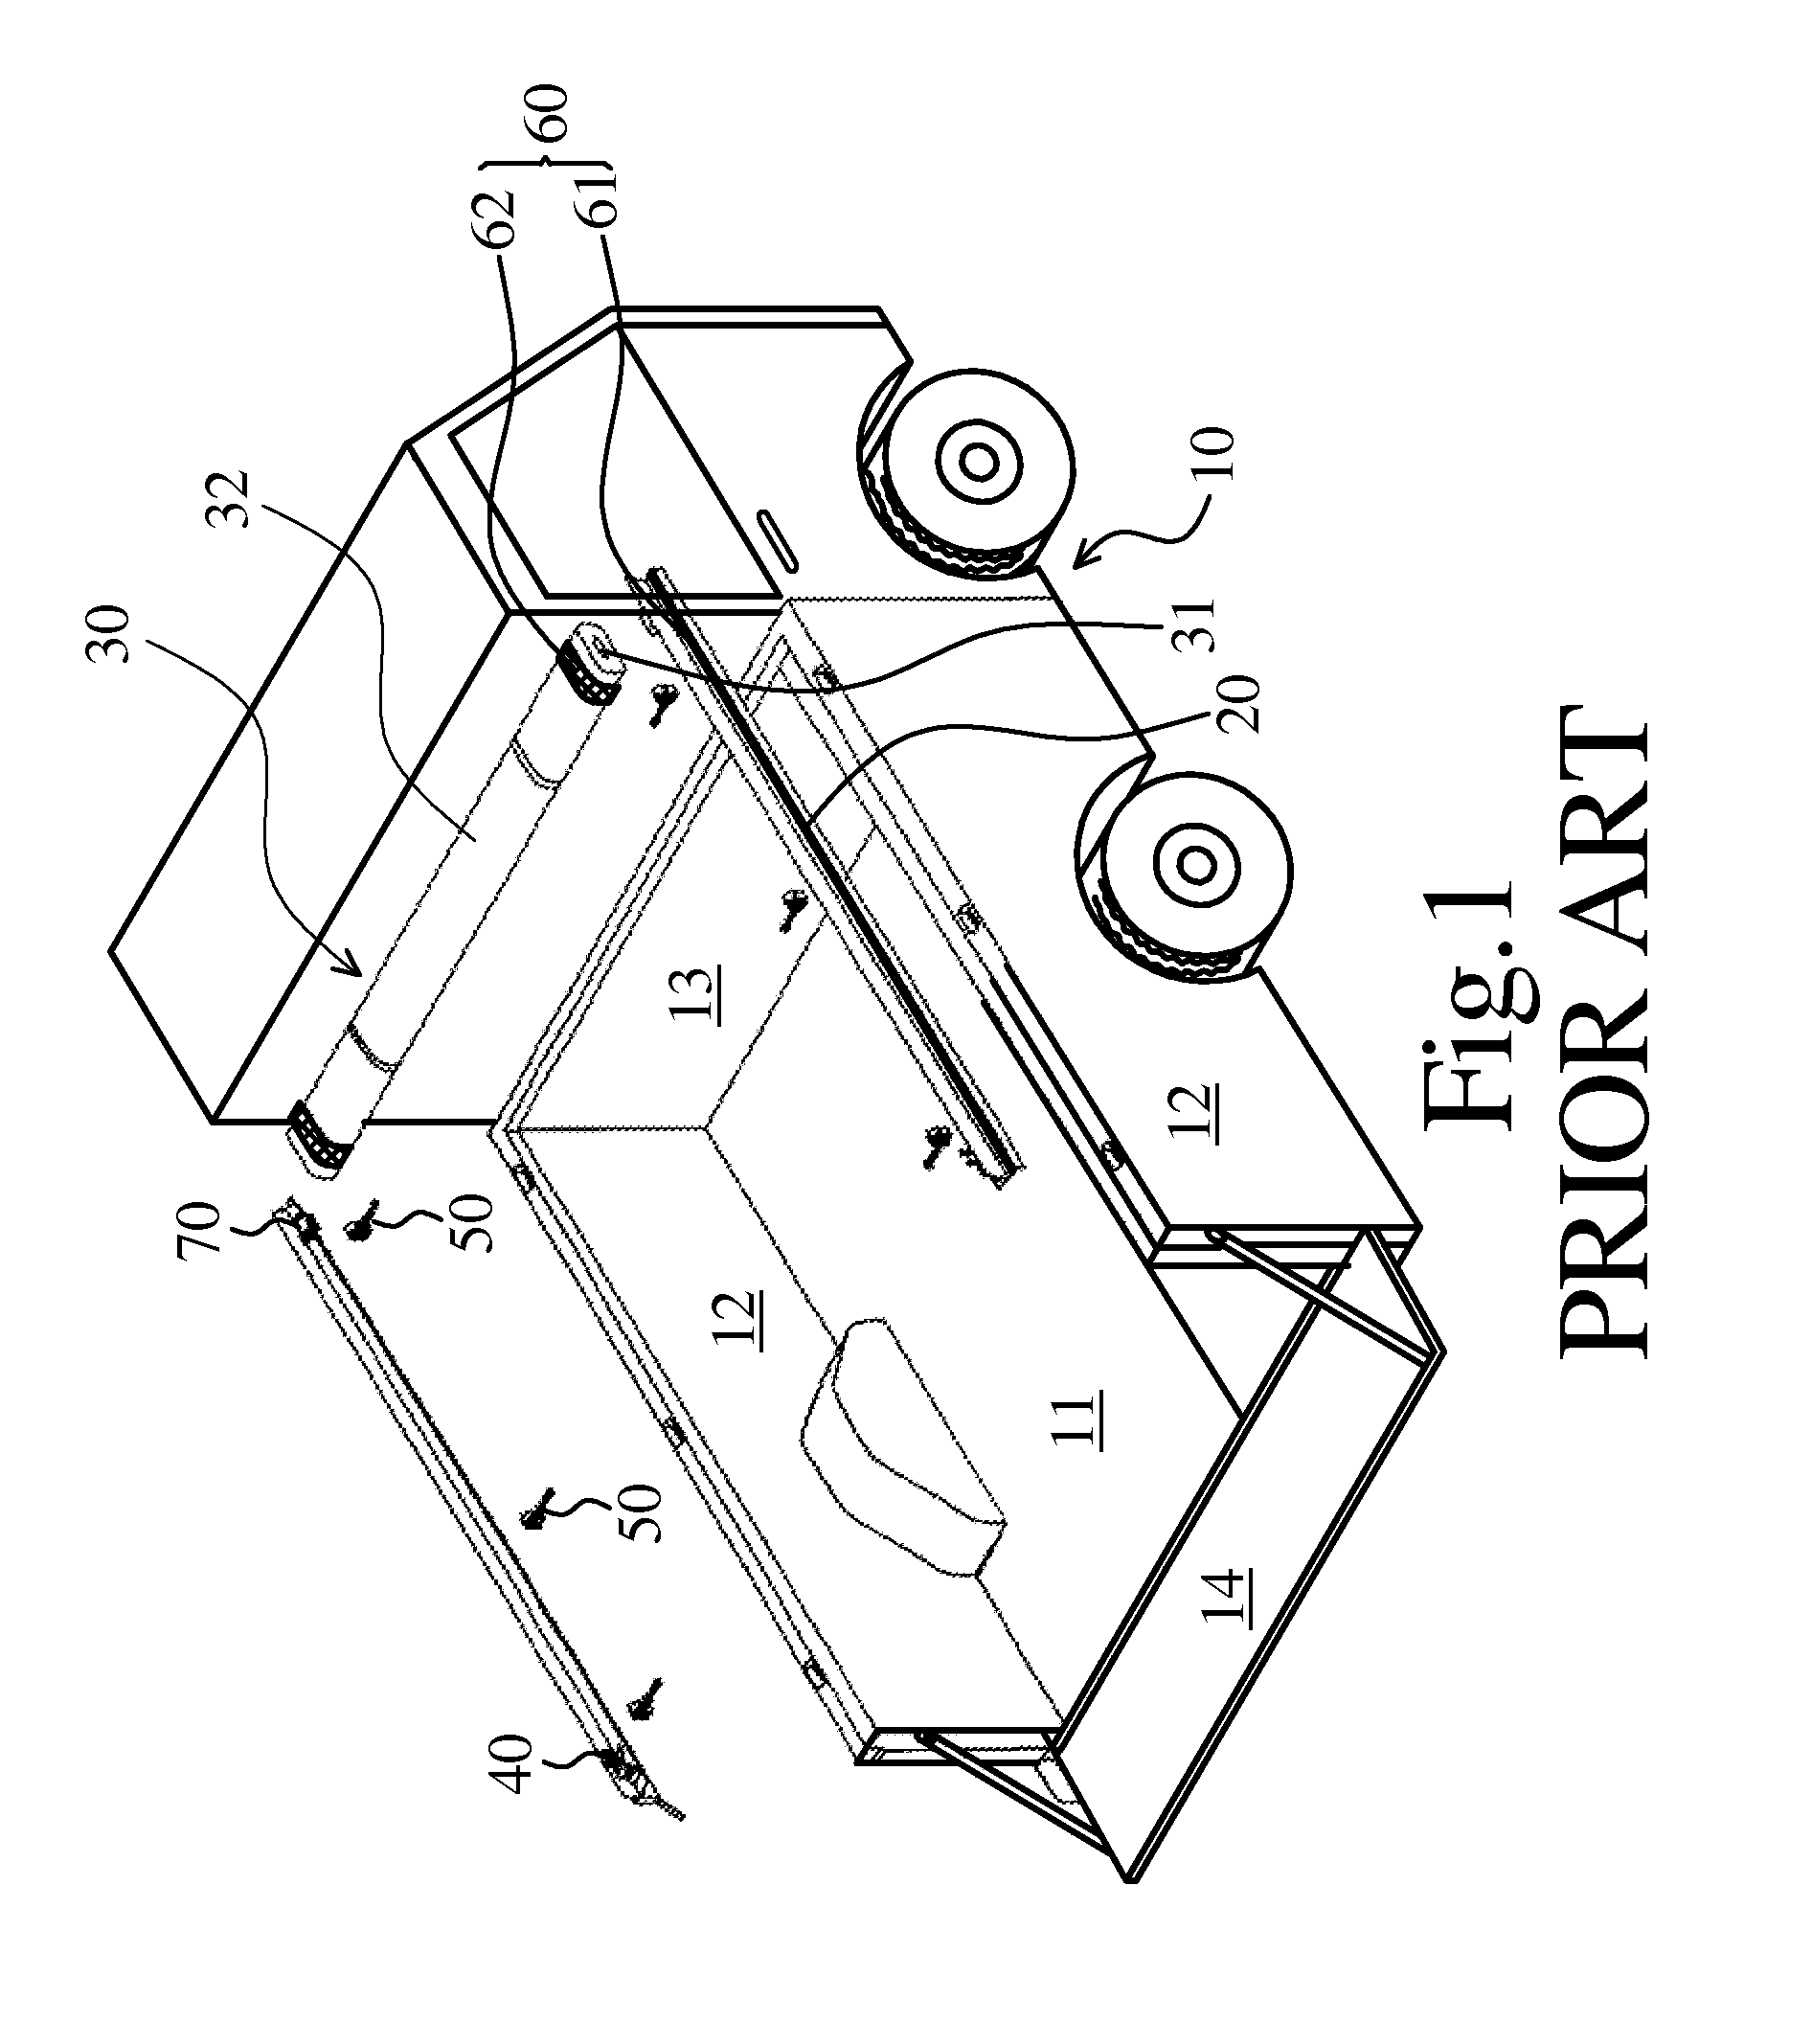 Side fastening assembly for flexible tonneau cover system of pick-up truck